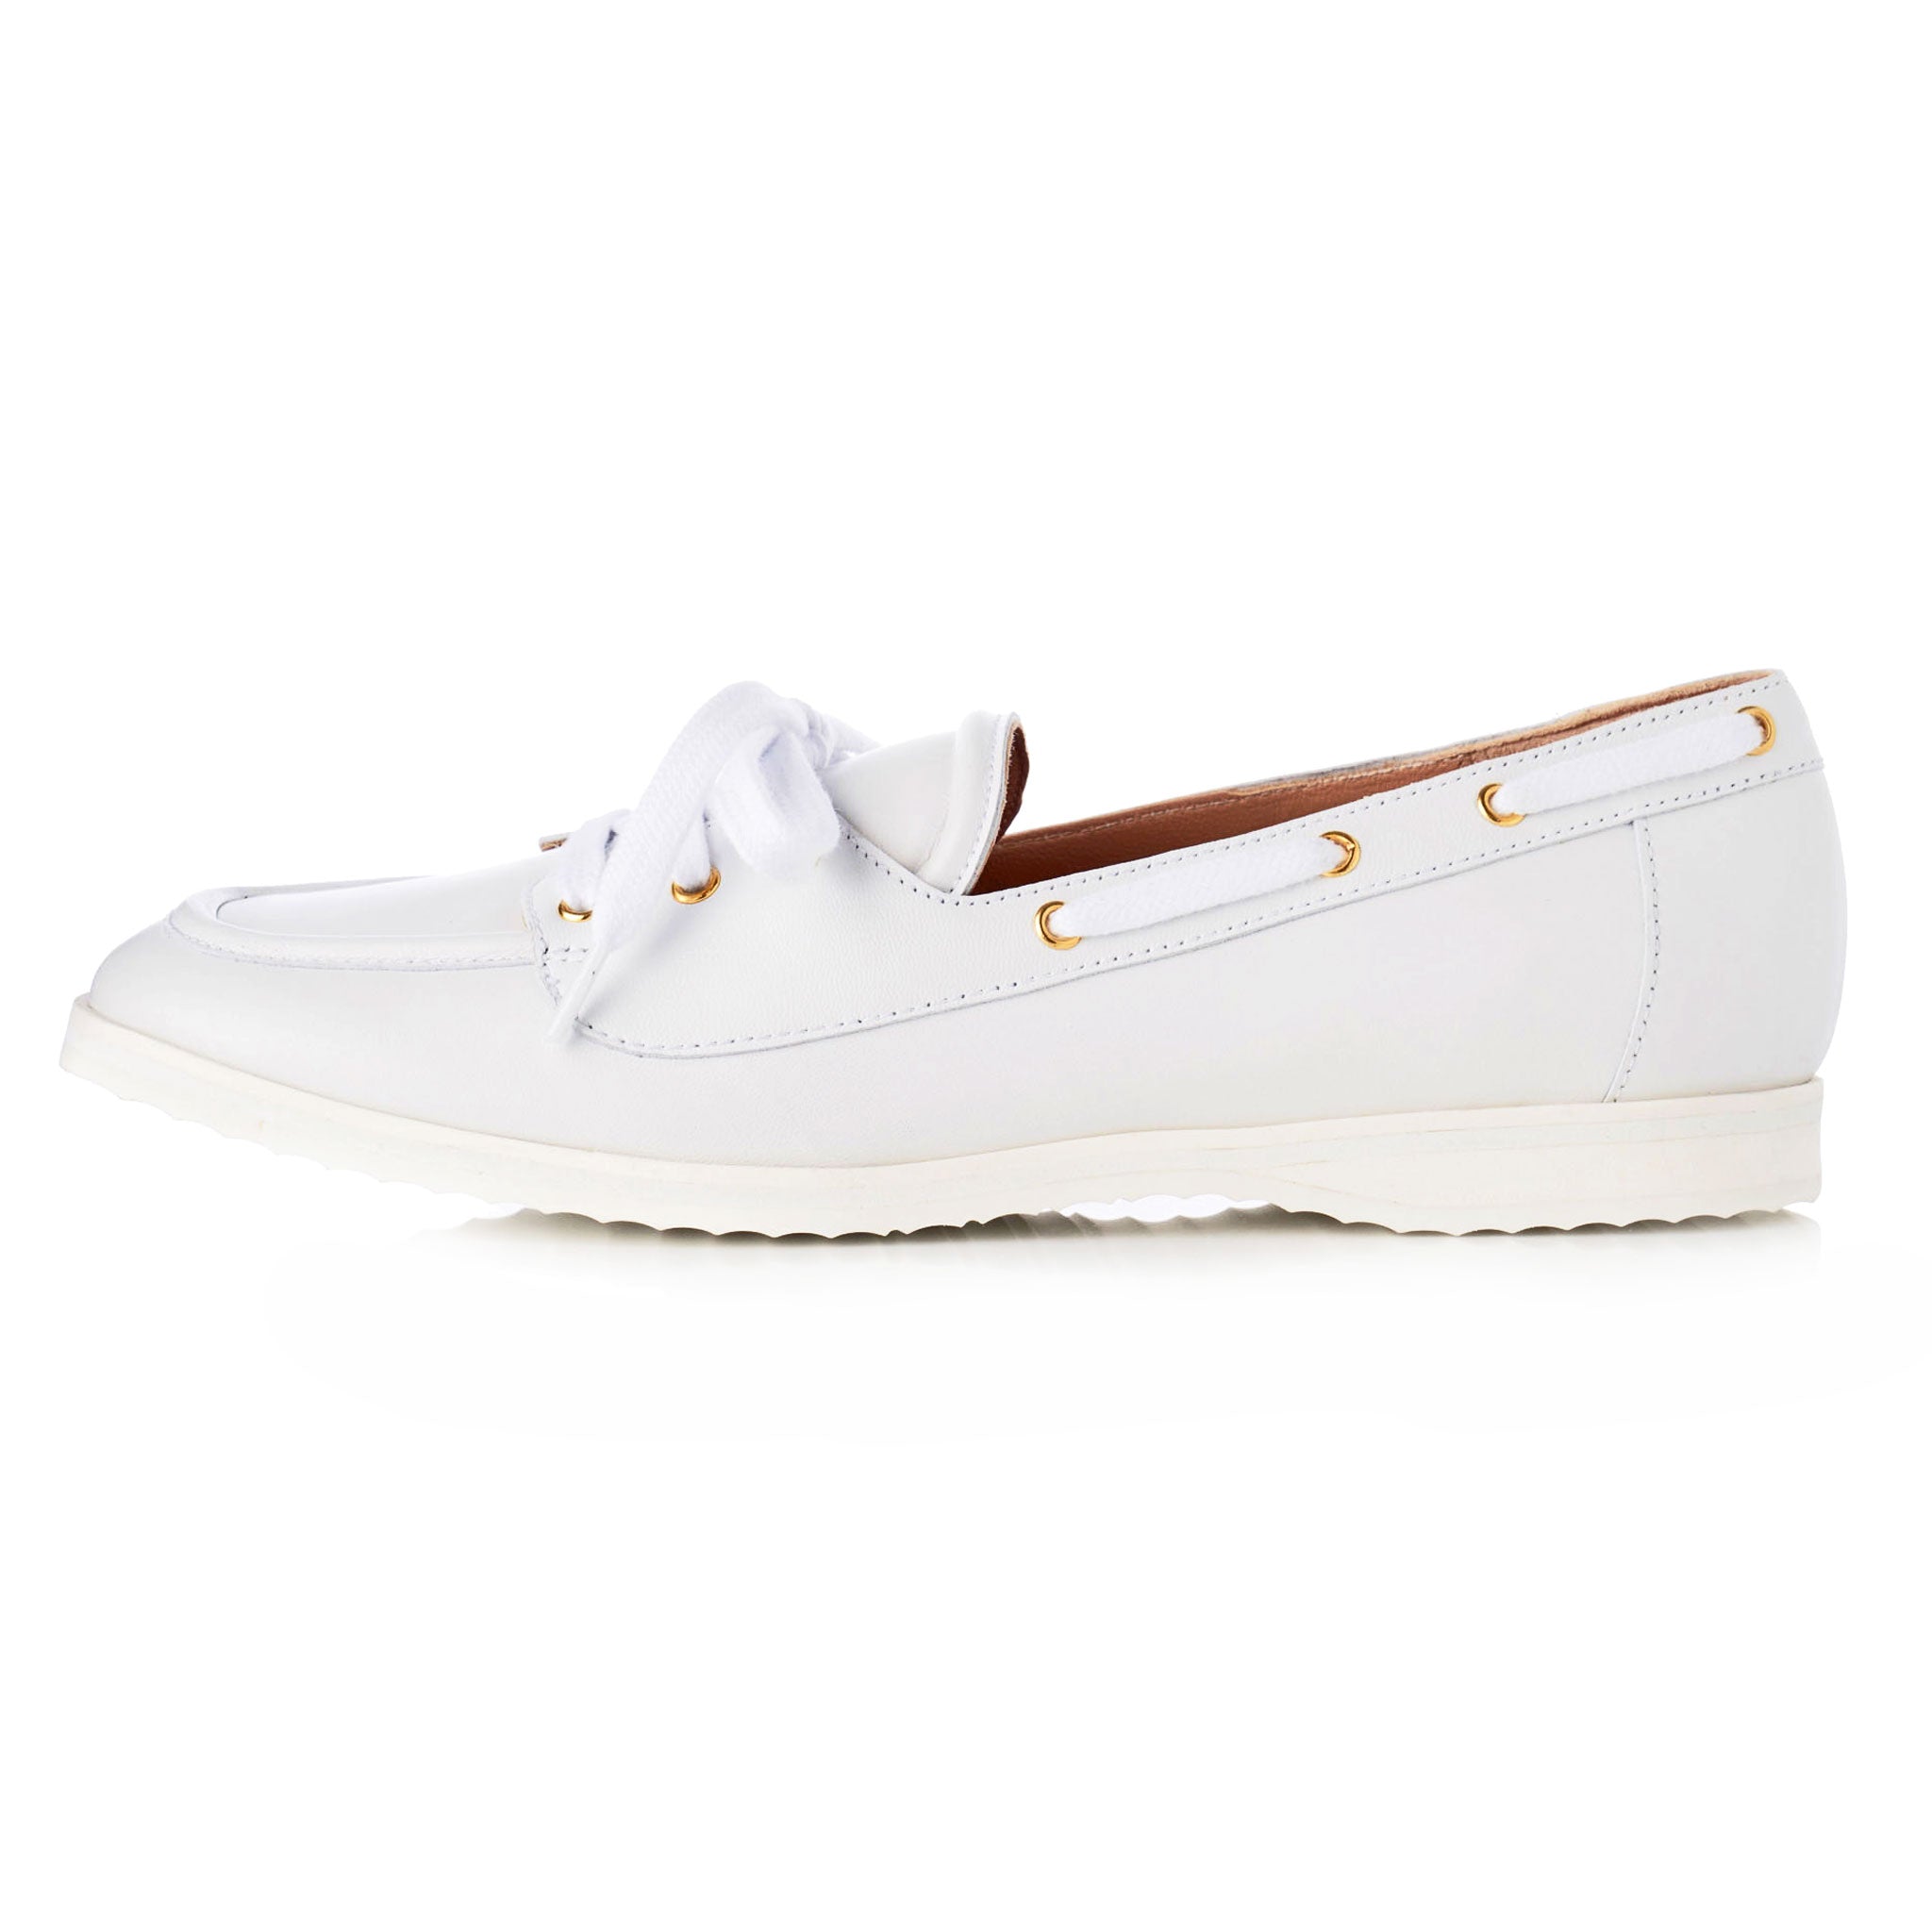 soft and comfortable white leather slip on shoes with extreme fashionable style and comfort